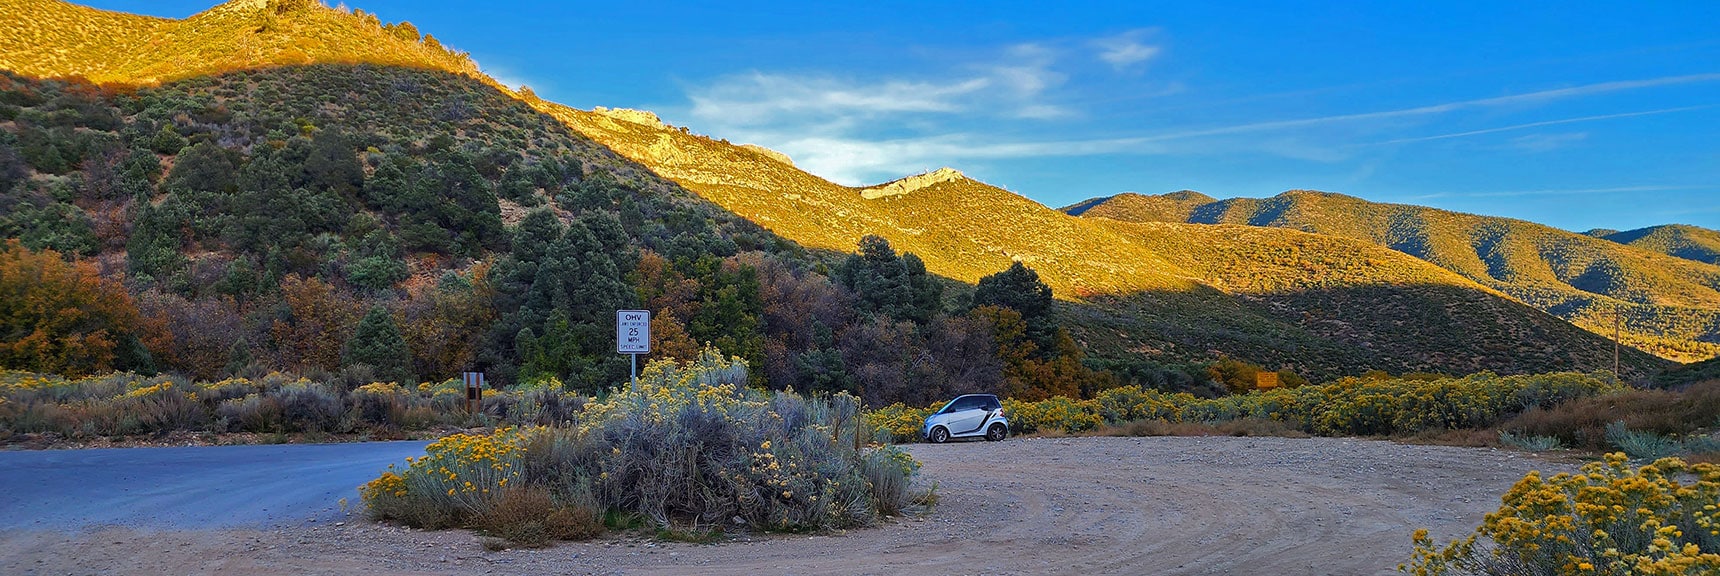 Final Return to Start Point at Intersection of Upper Lovell Canyon and Lovell Summit Roads. | Griffith Shadow Loop | Lovell Canyon, Nevada